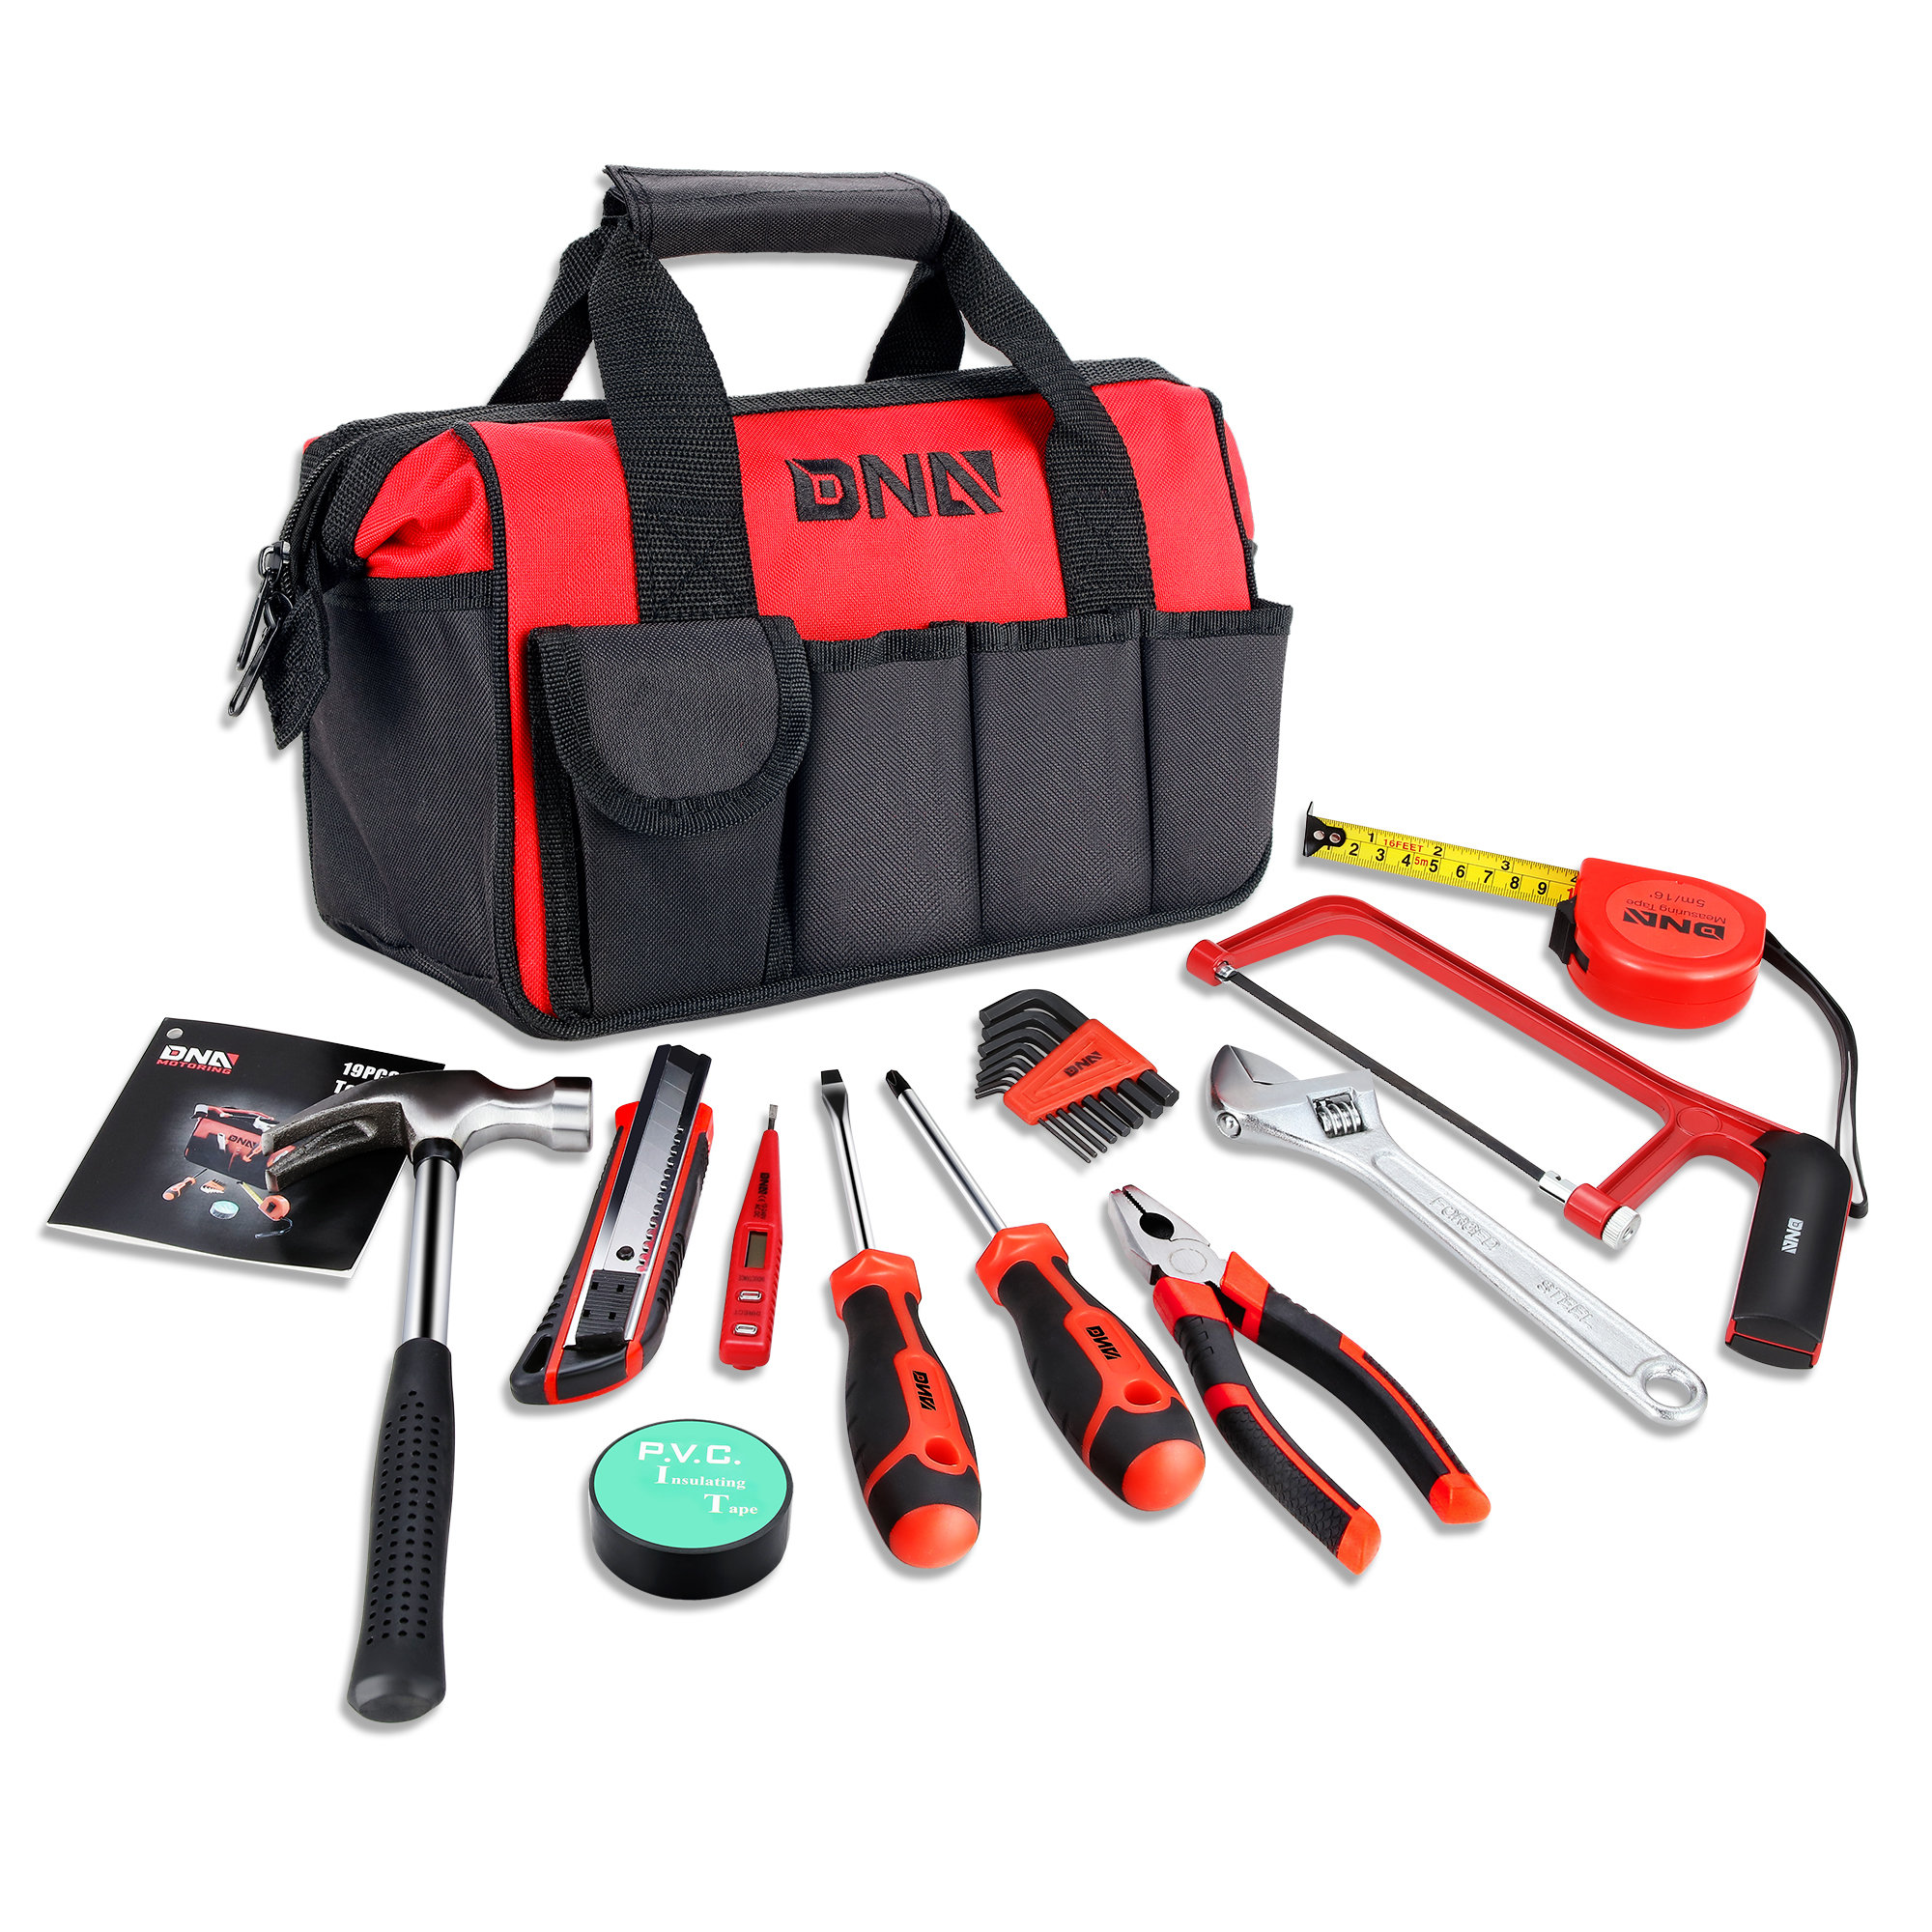 DNA Motoring Tools-00204 Red 19 Pcs Portable Tool Kit Household General Repair Adjustable Wrench Claw Hammer Set Hand Tool Canvas Bag